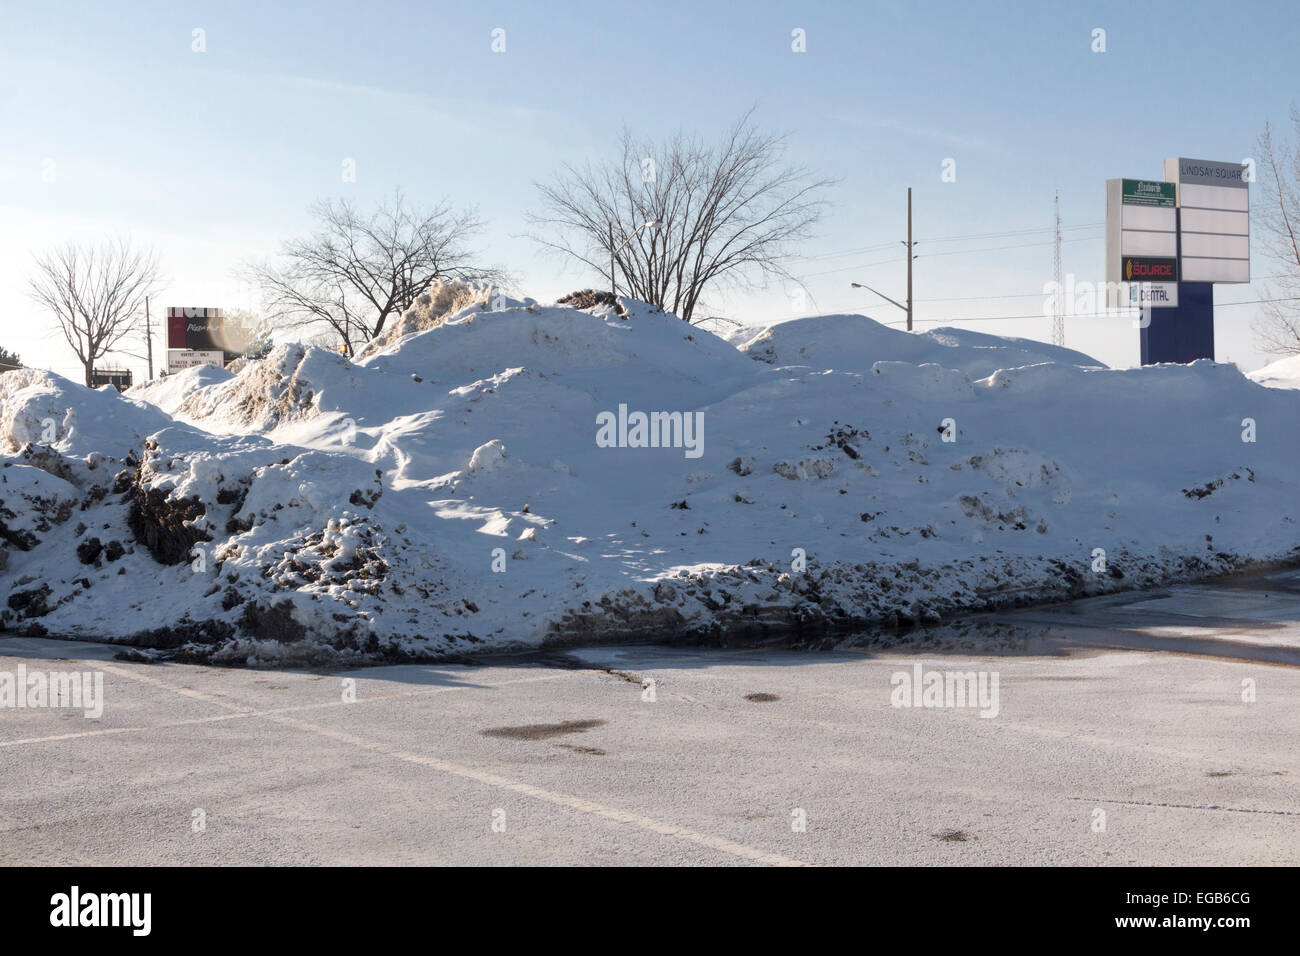 Japanese girl laying in snow in parking lot